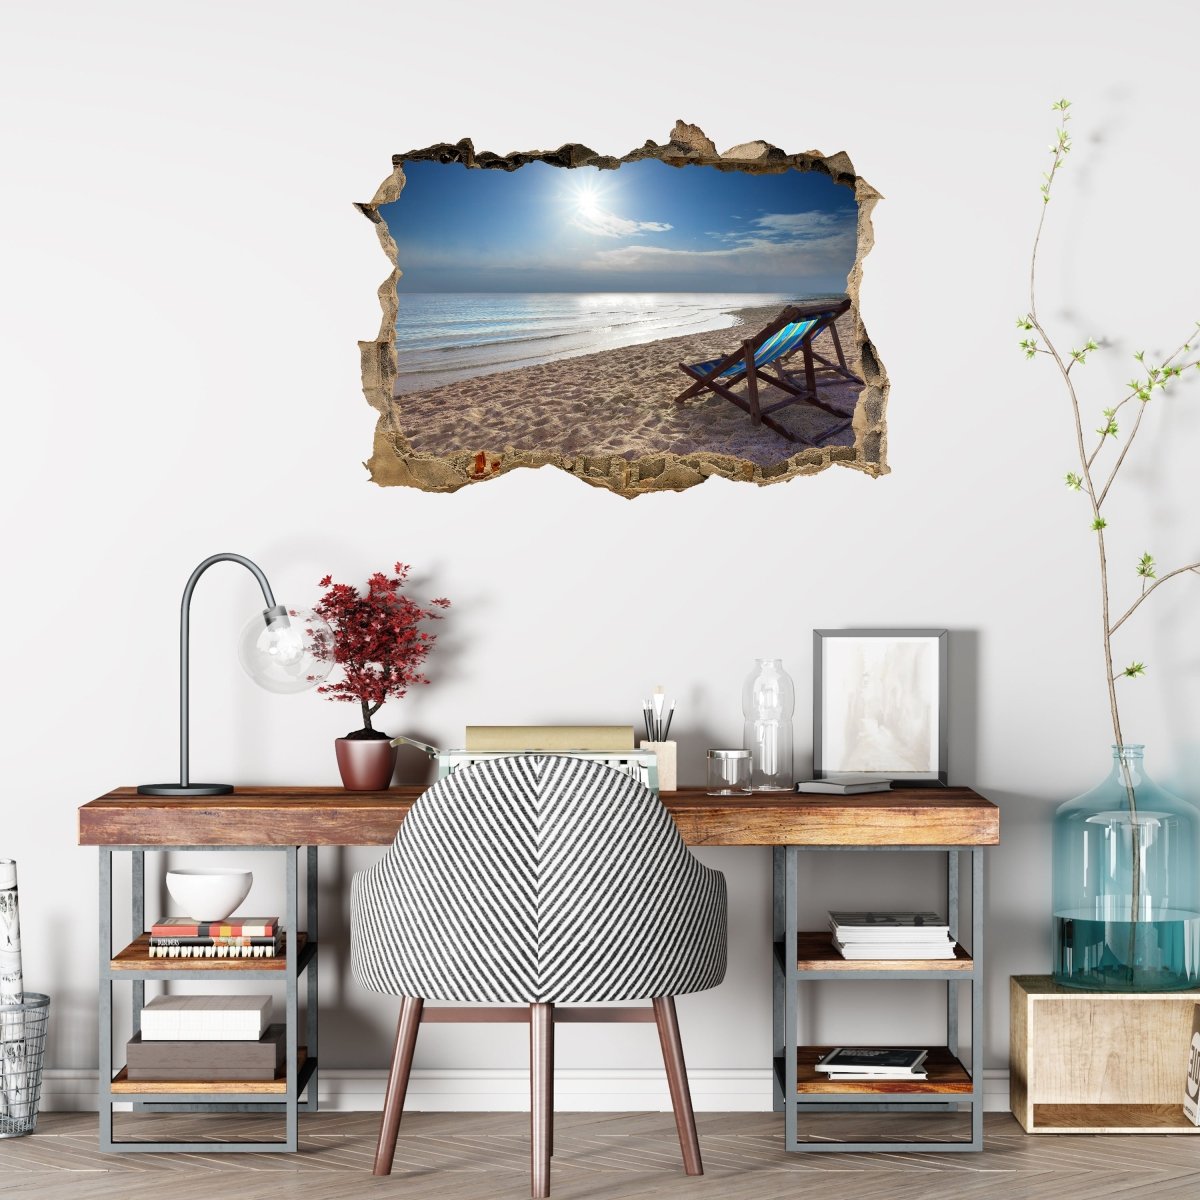 Wooden chairs on the beach 3D wall sticker - Wall Decal M0890